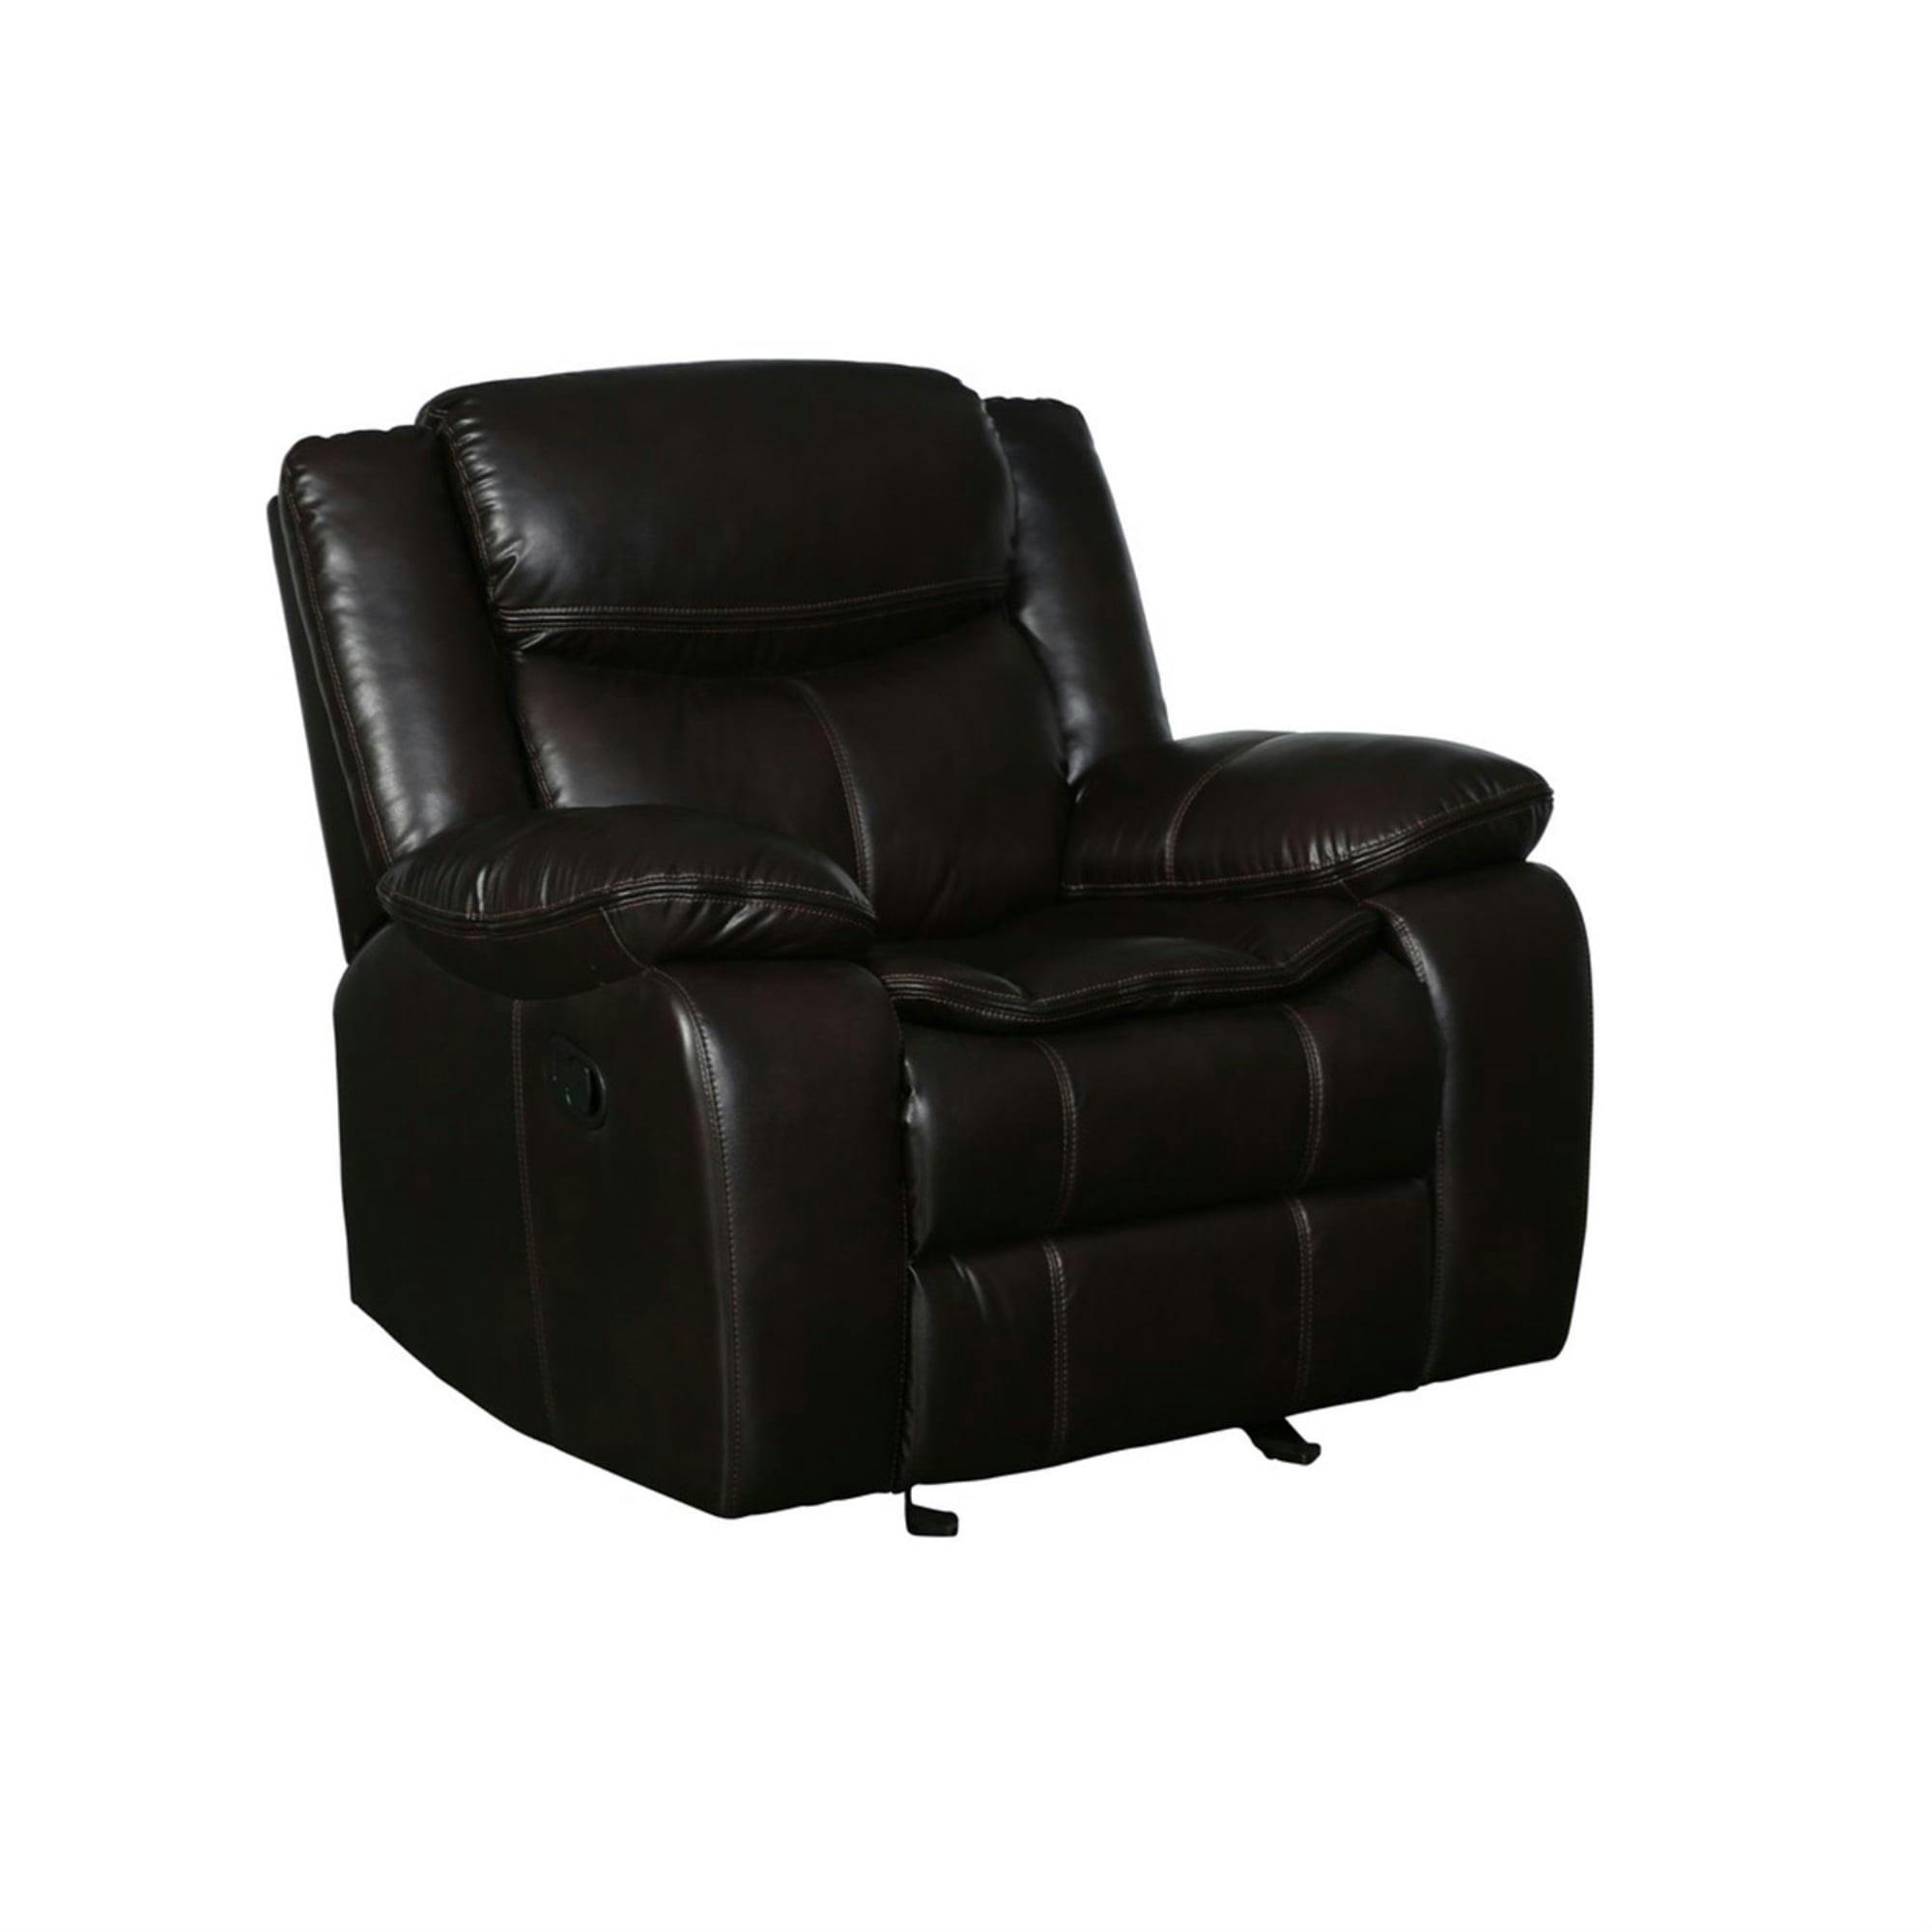 Elegant Comfort Brown Leather Recliner with Wooden Frame - 42x36x40